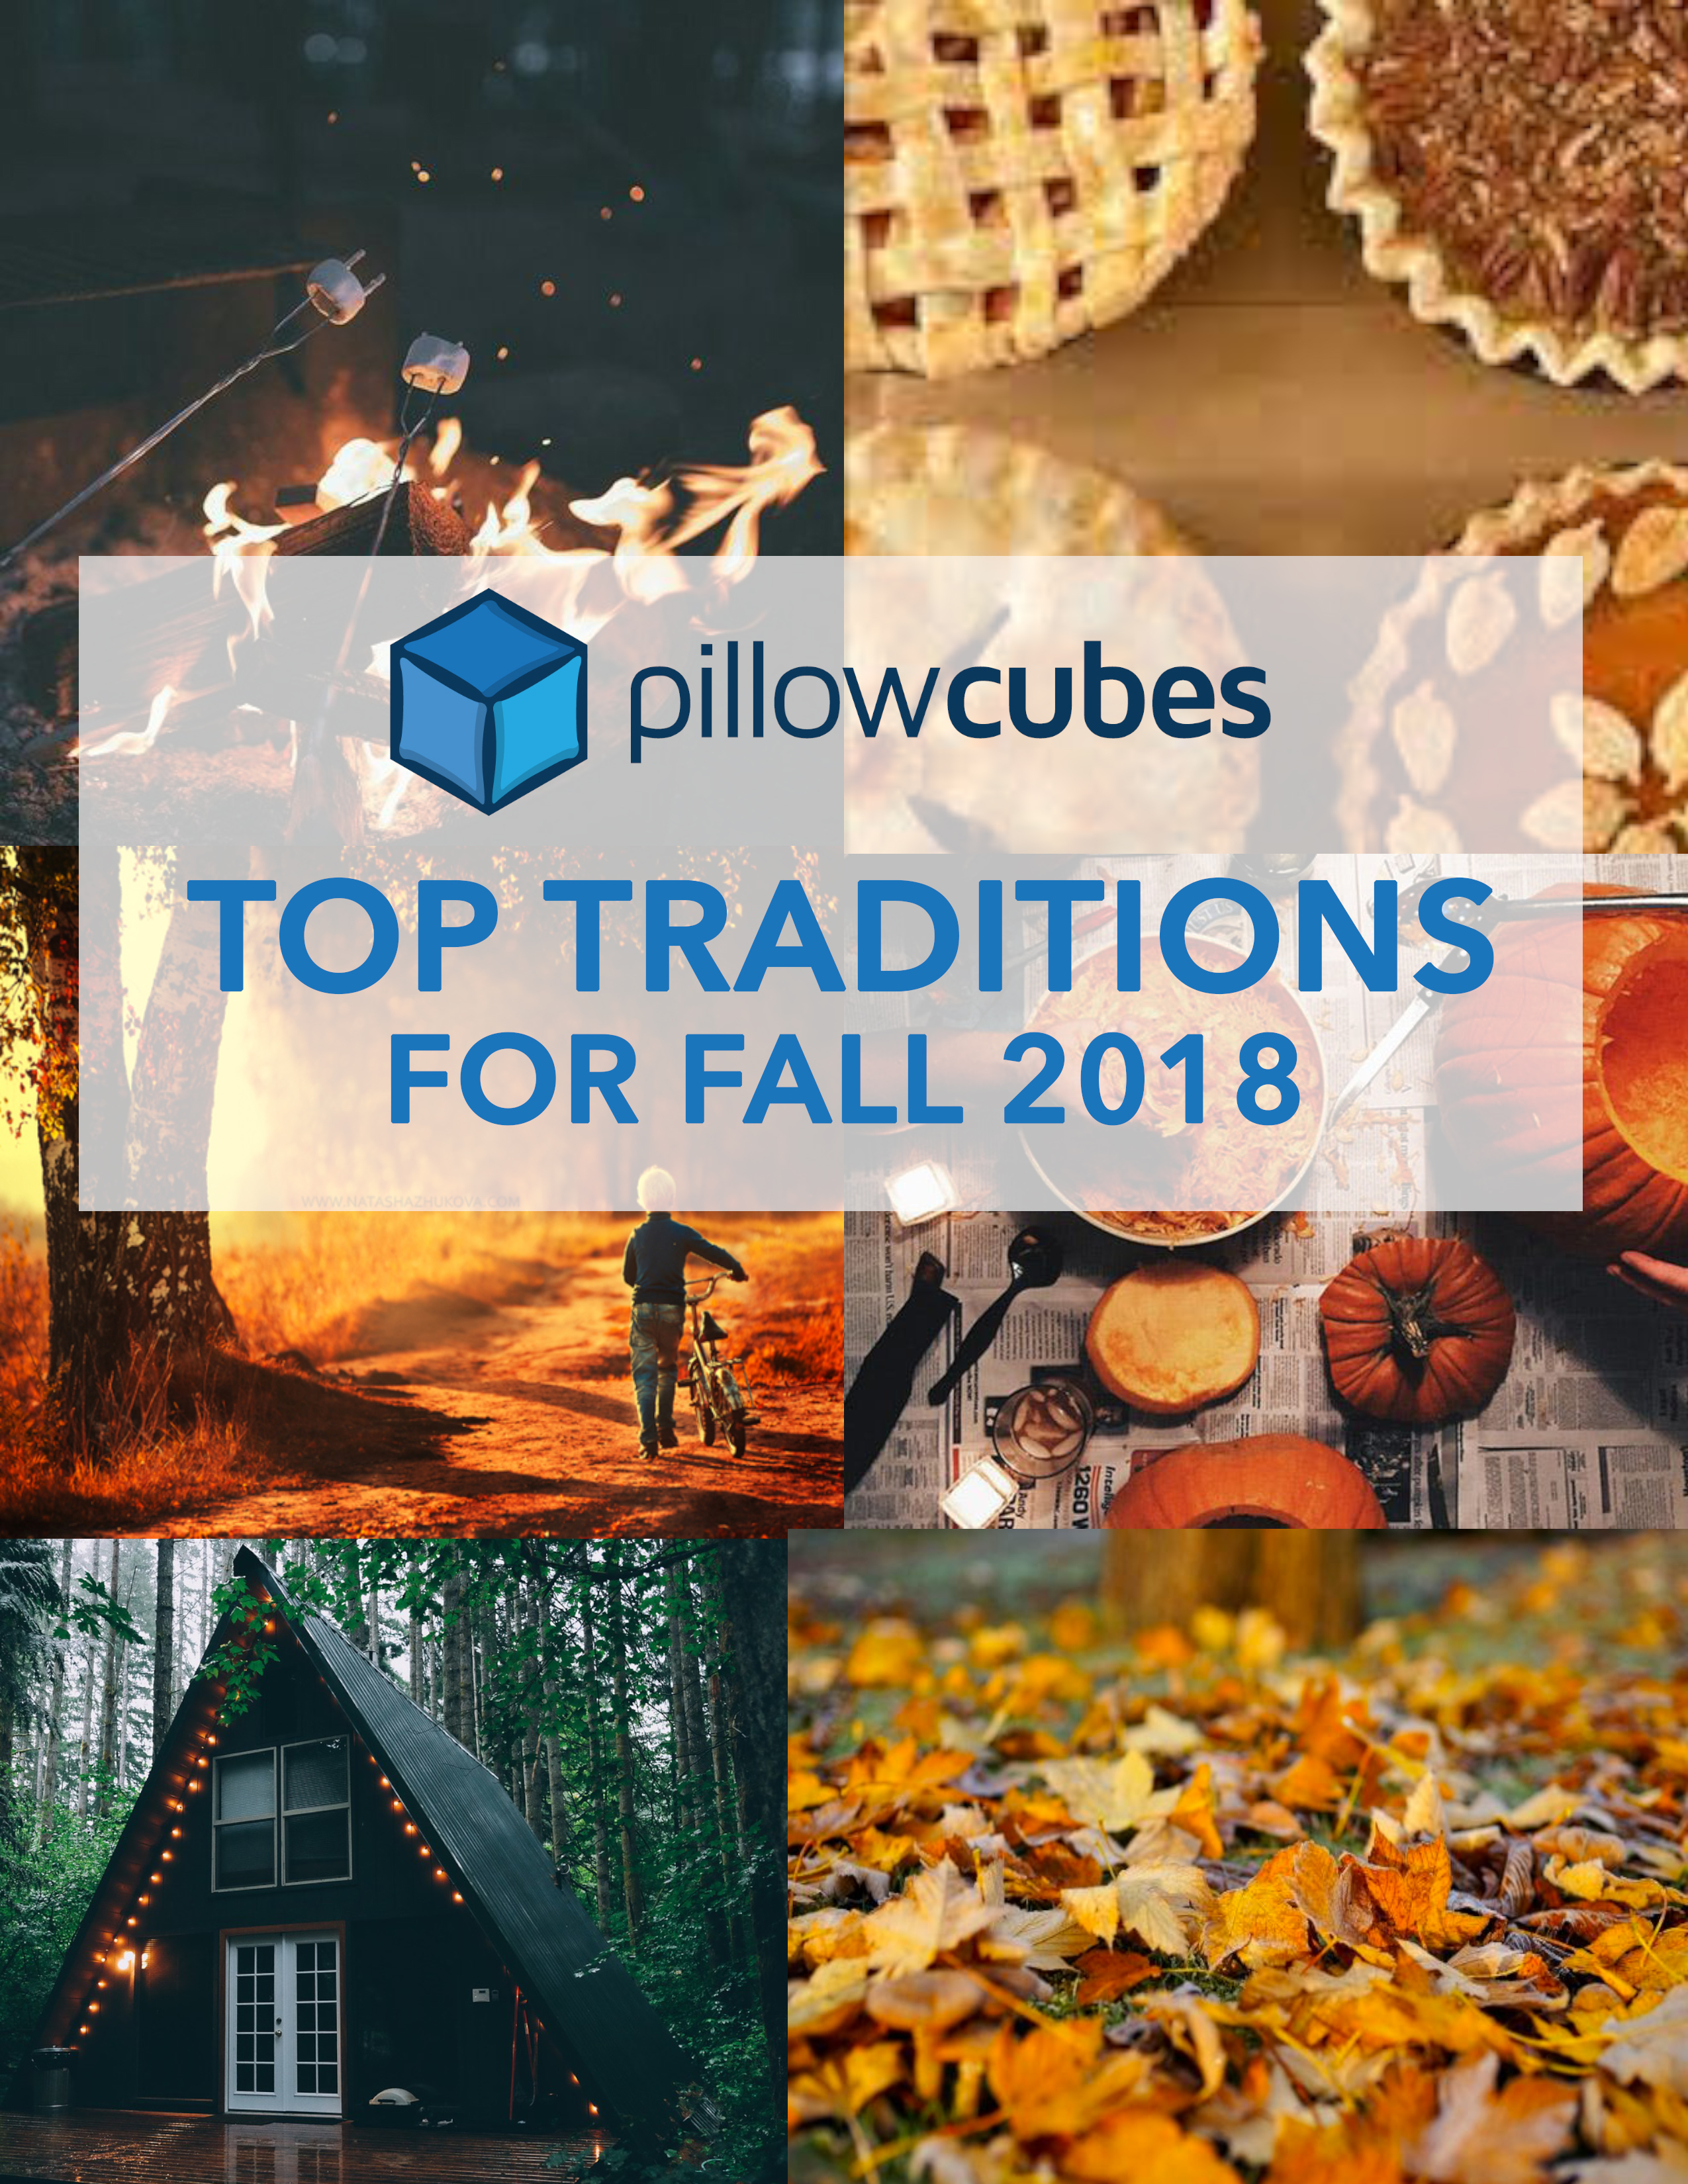 Top Fall Traditions | Fall 2018 Ideas